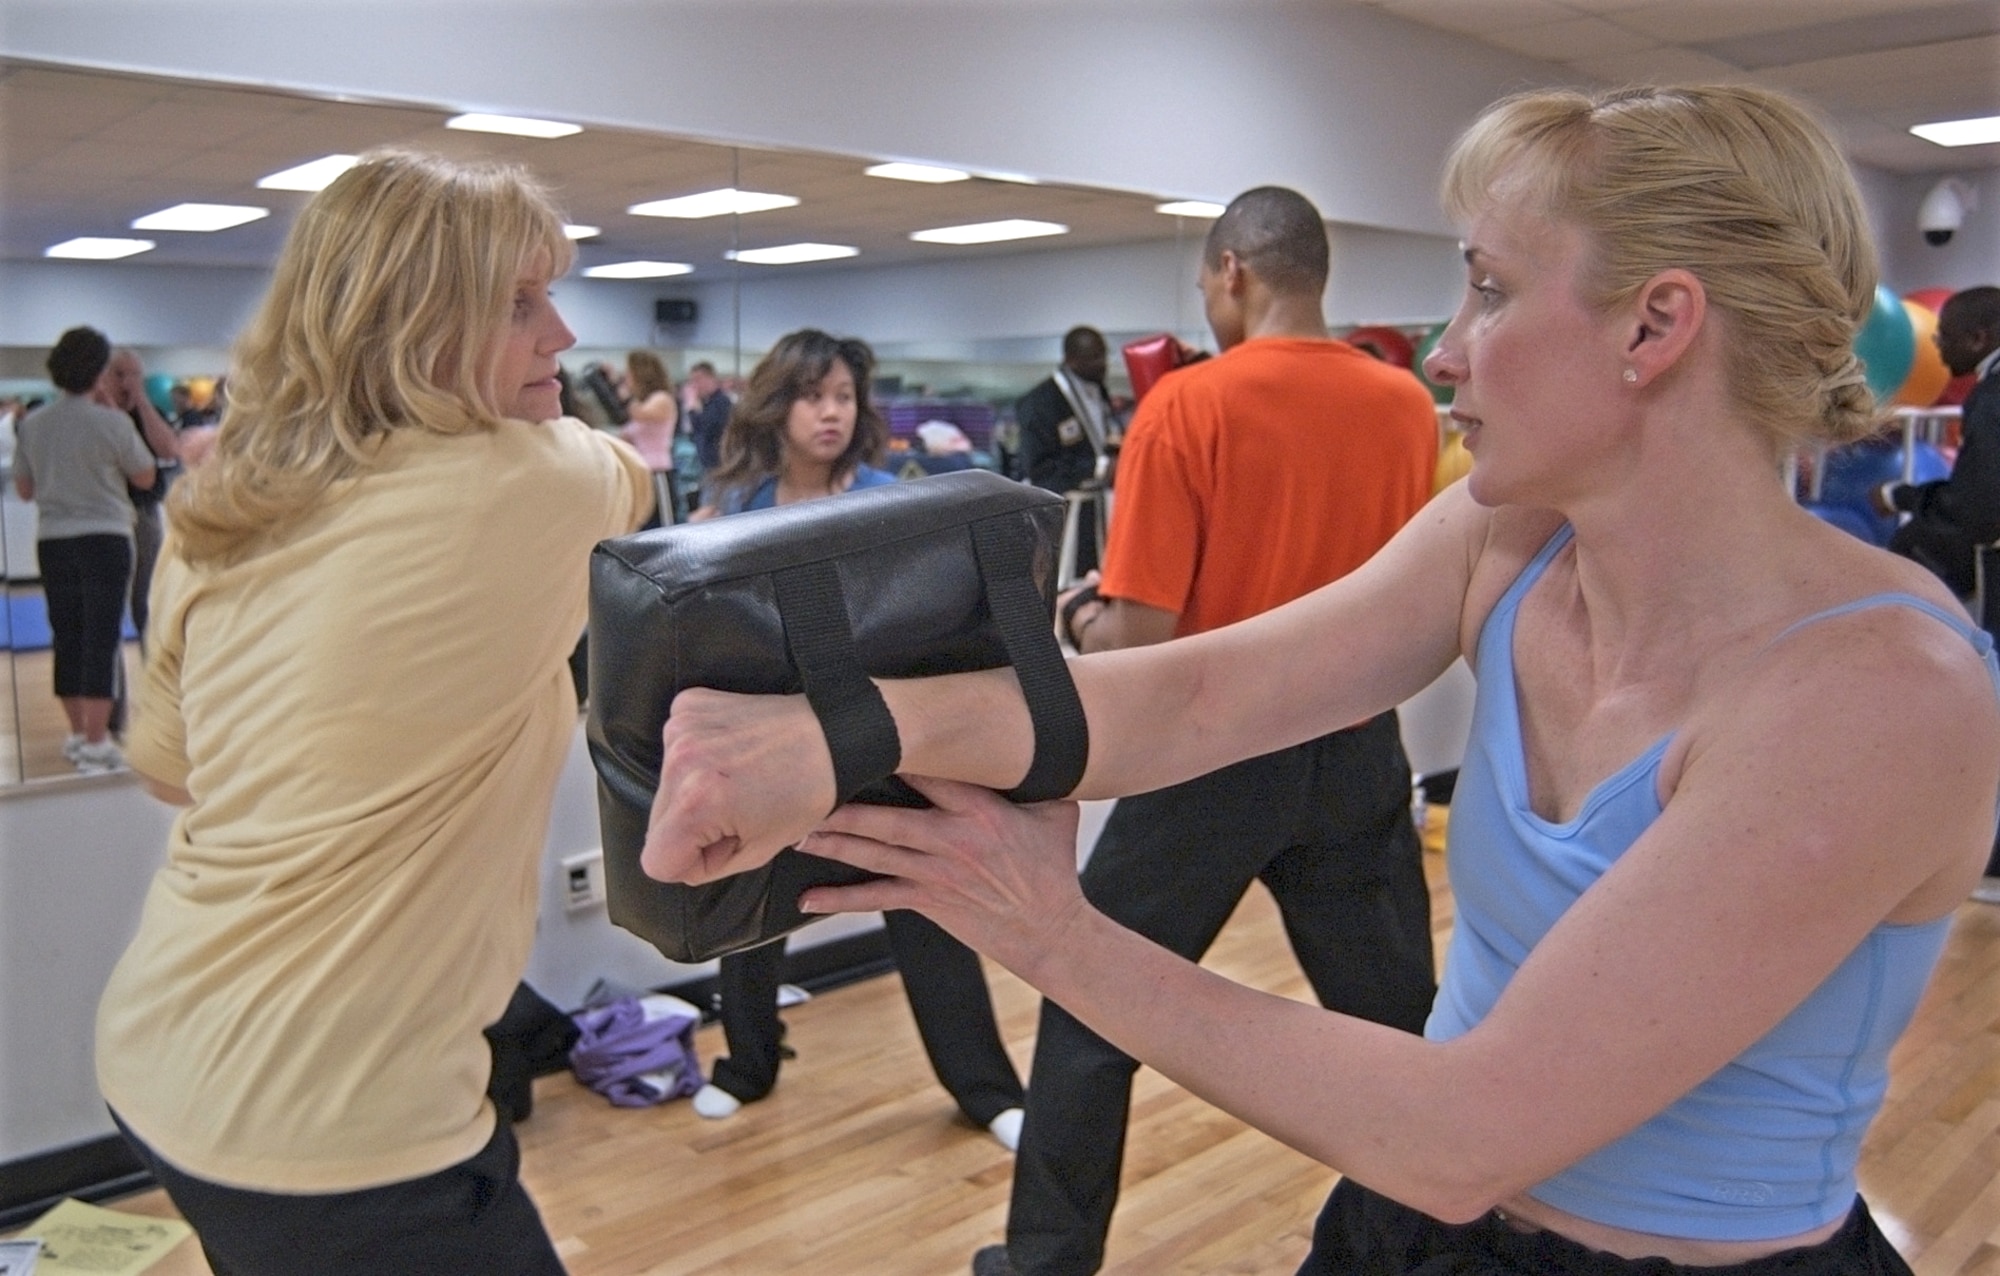 WRIGHT-PATTERSON AIR FORCE BASE, Ohio -- Toni Tebbing, left, with the National Air and Space Intelligence Center, winds up for an elbow blow into the pad held by Karen Douglas at the Sexual Assault Response Coordinator women’s self-defense class April 10. (U.S. Air Force/Spencer P. Lane)